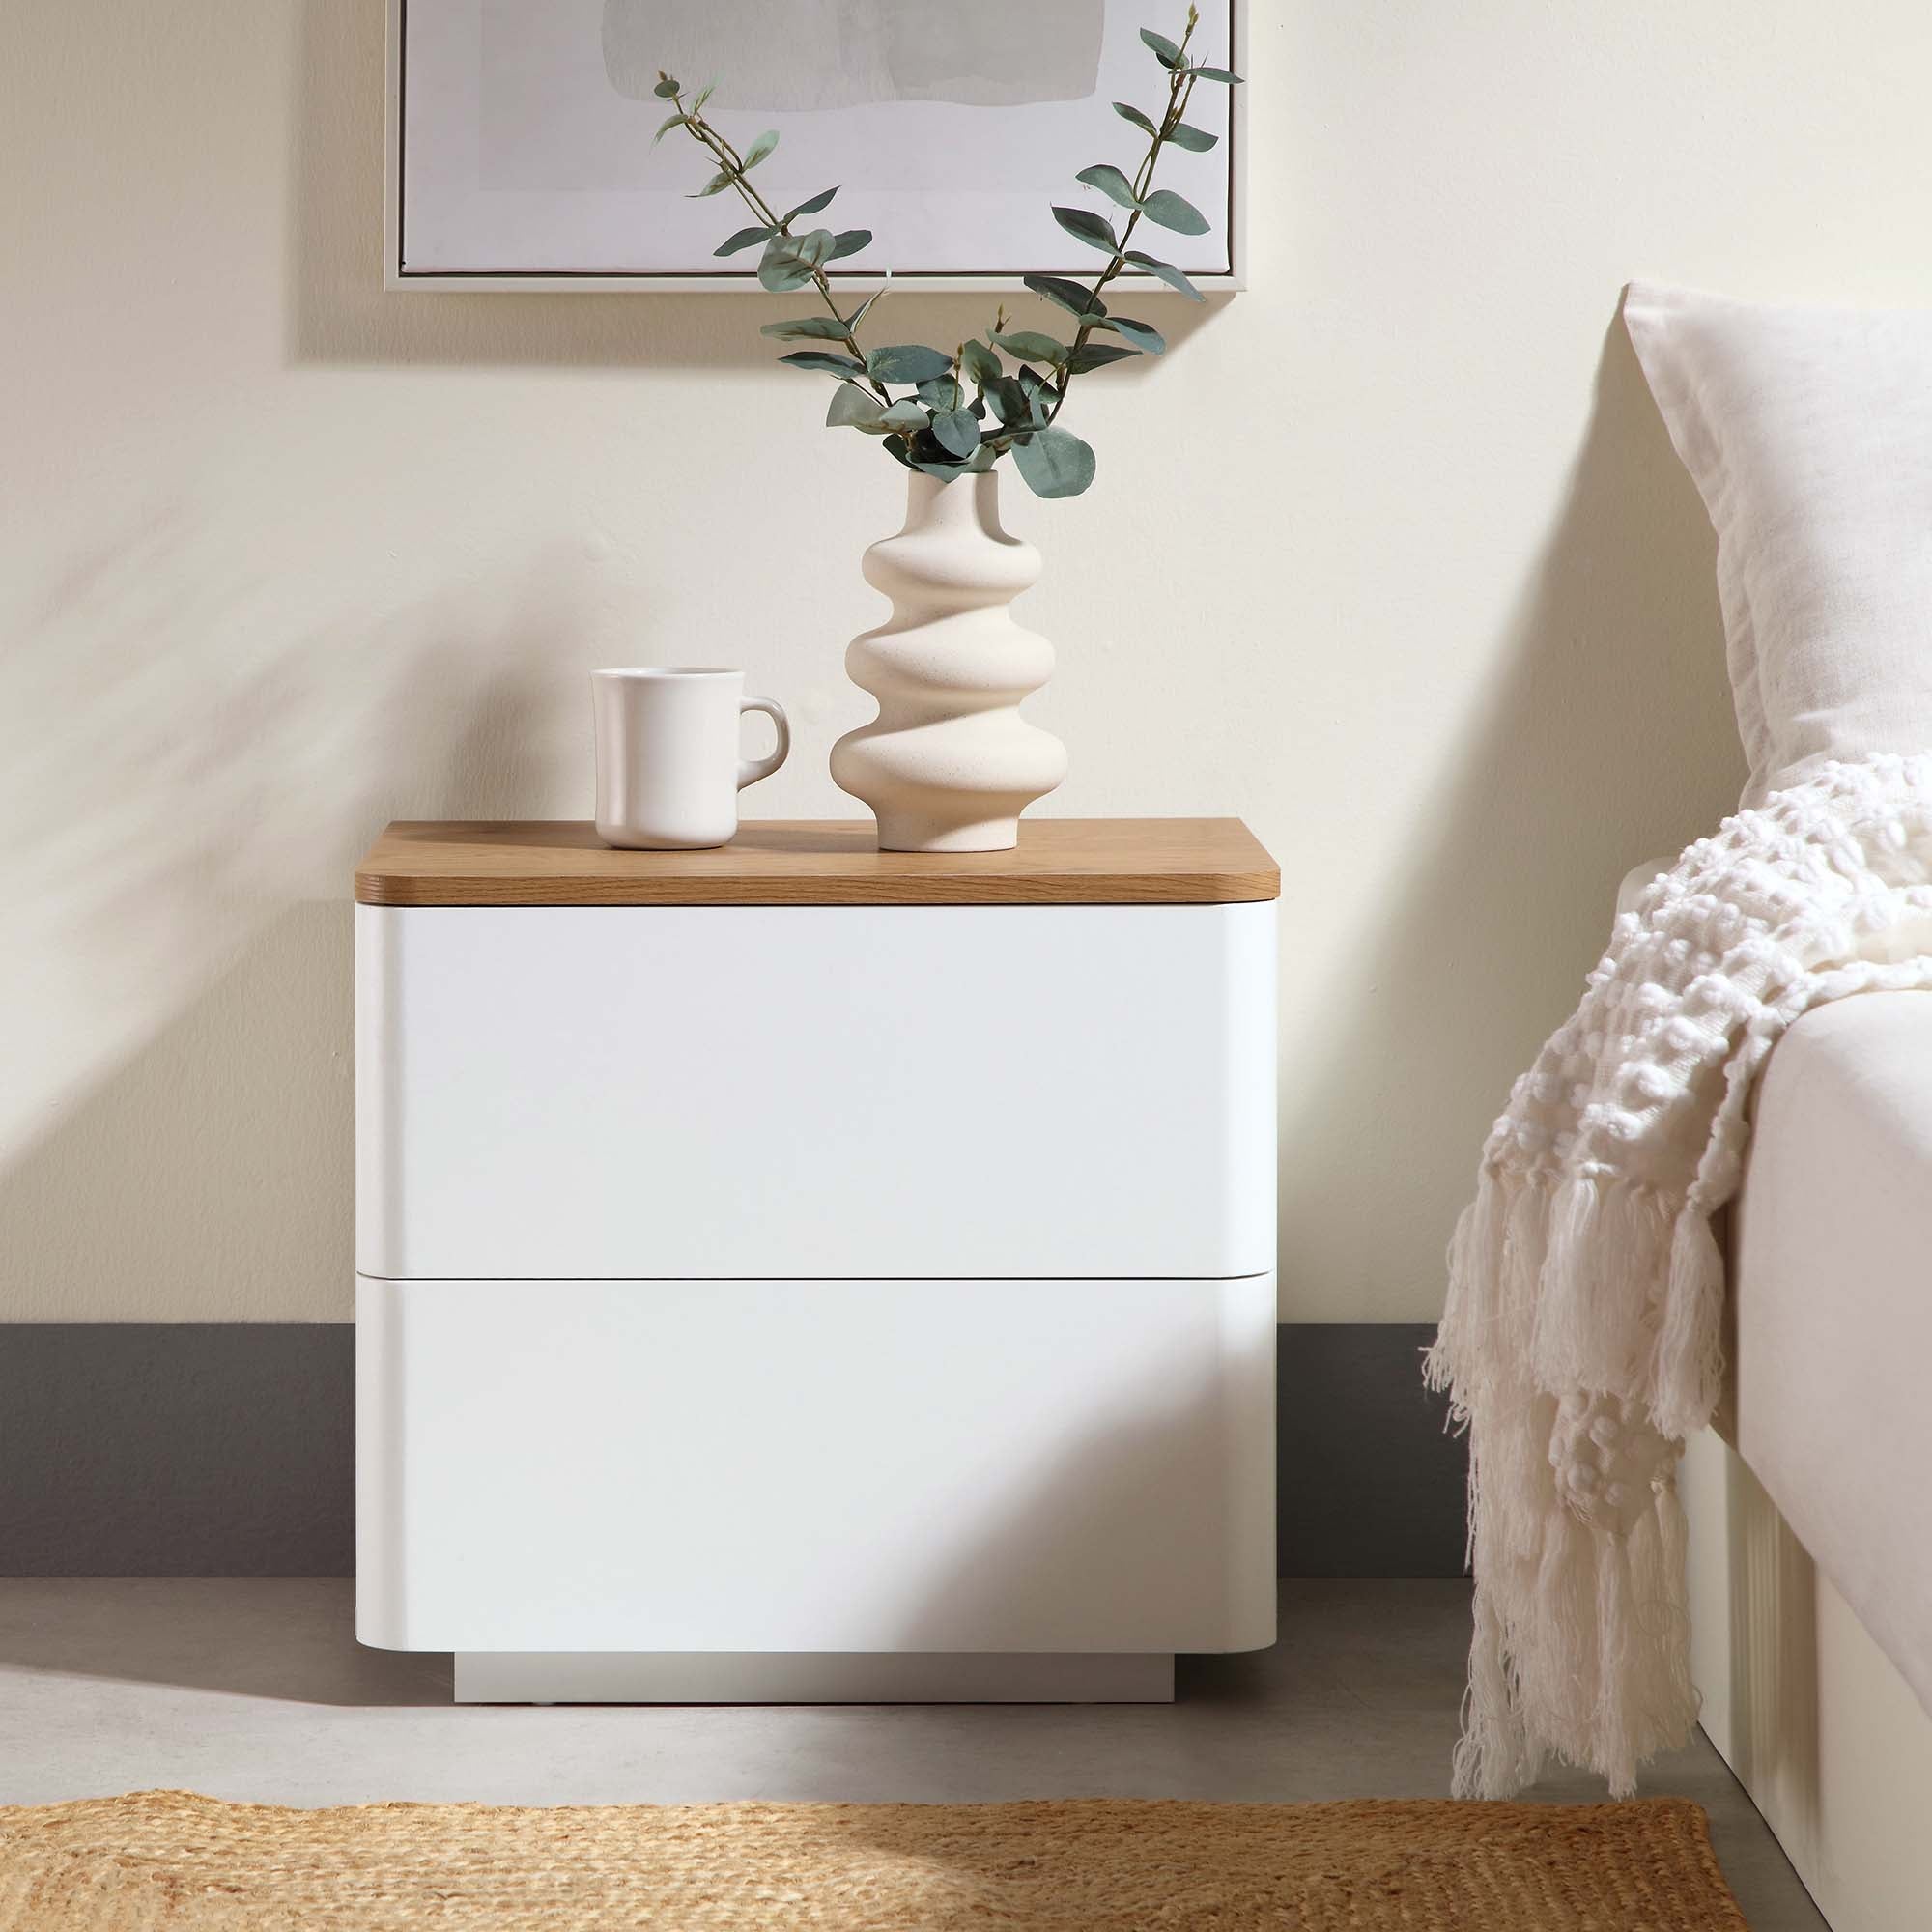 Agnes Curved Edge 2 Drawer Bedside Table